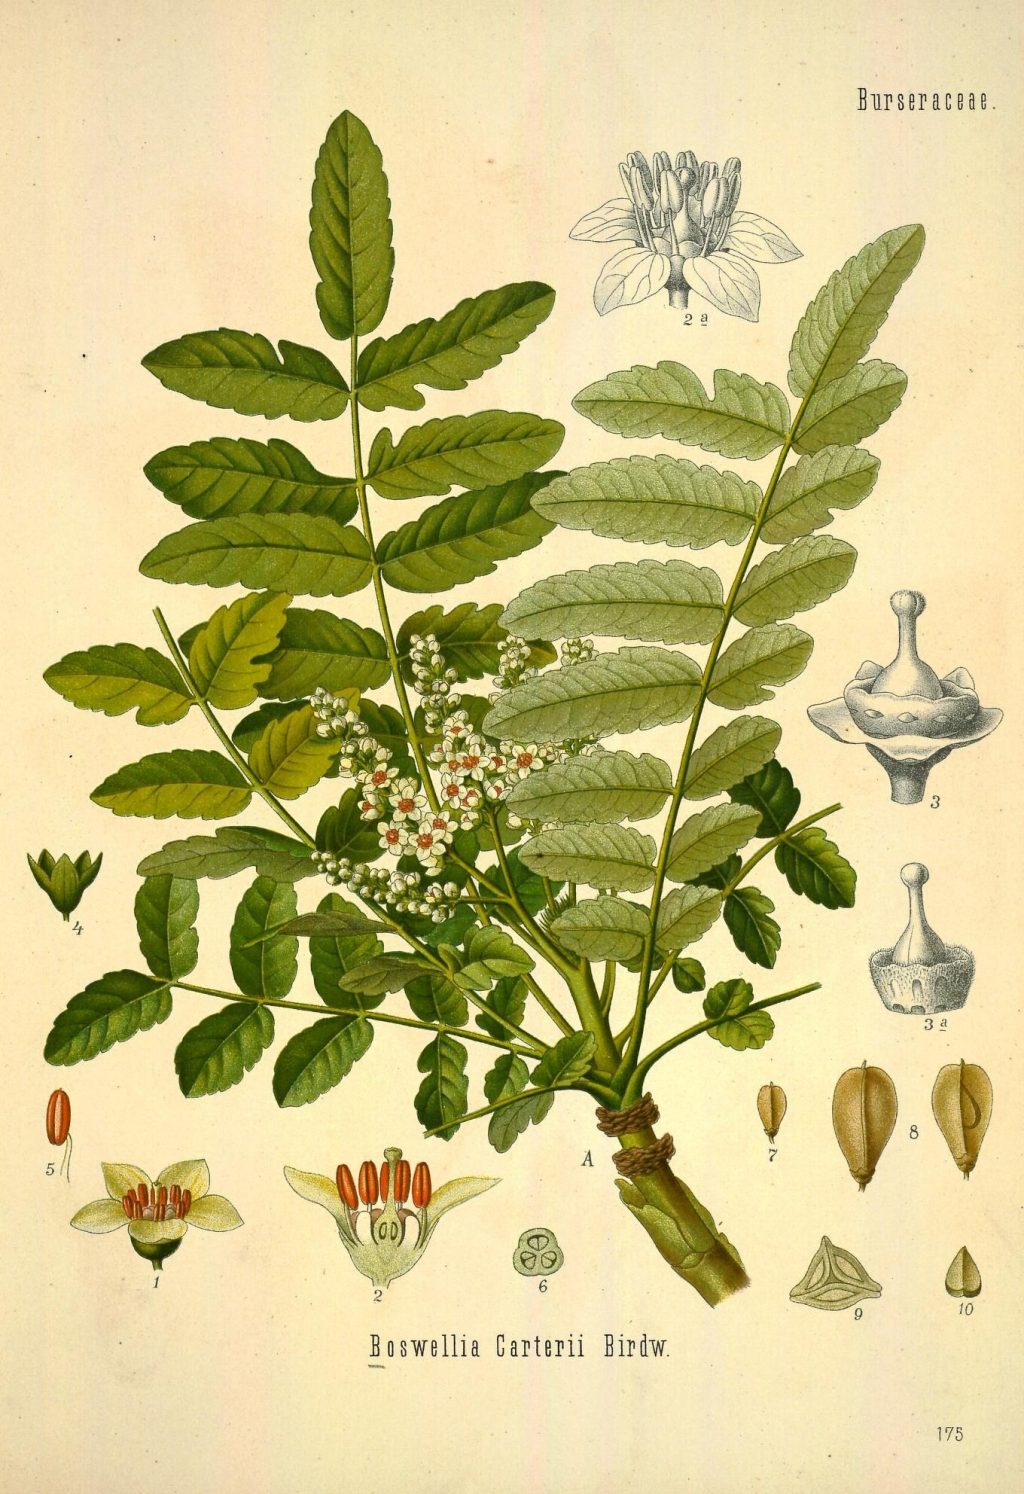 Old illustration of a species in the genus Boswellia.